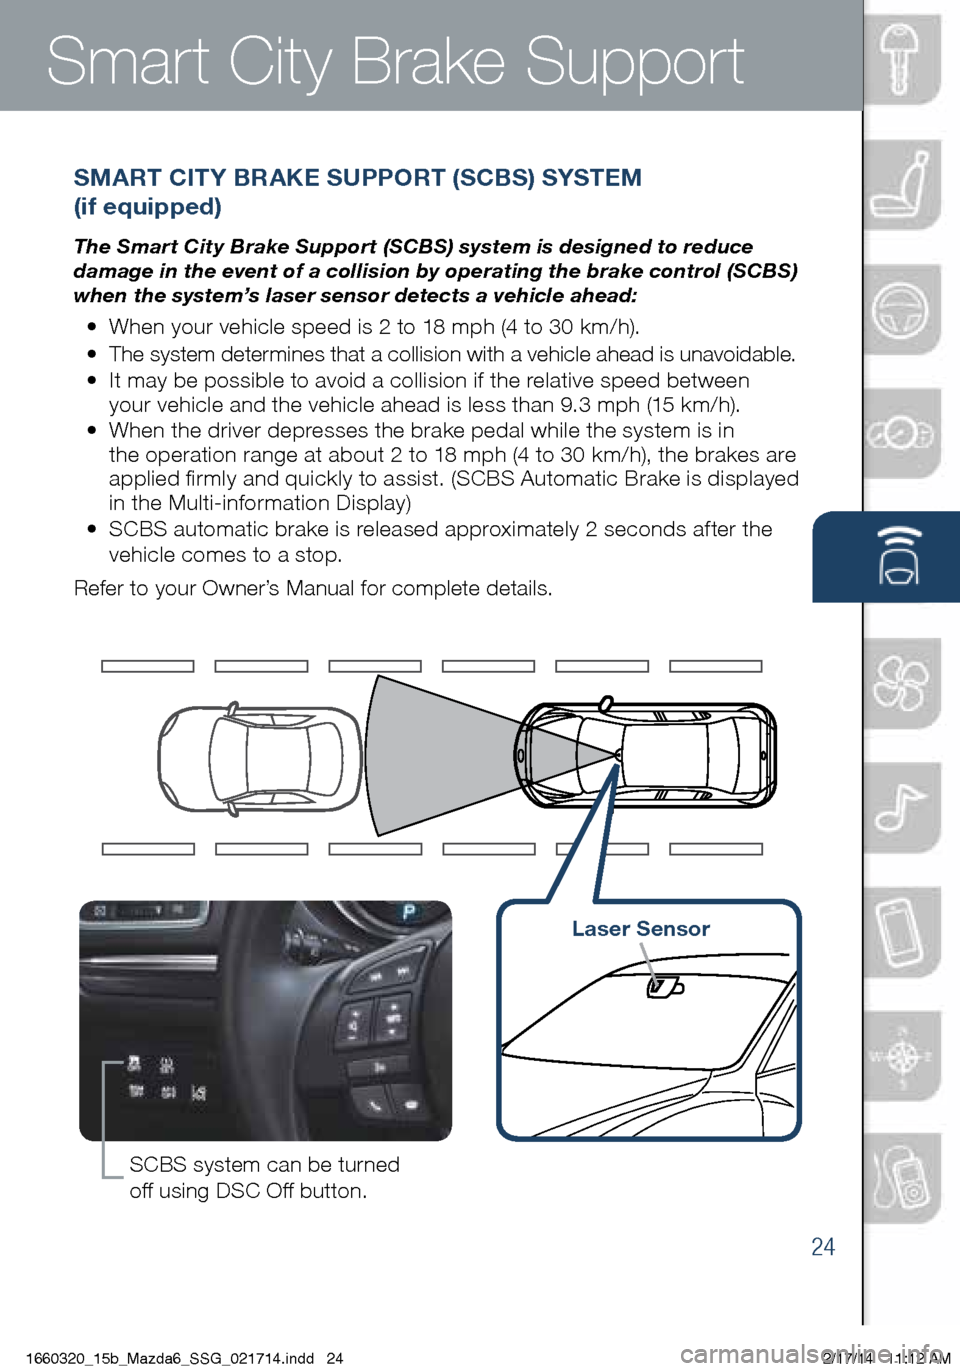 MAZDA MODEL 6 2015  Smart Start Guide (in English) 24
Smart City Brake Support
SMART CITY BRAKE SUPPORT (SCBS) SYSTEM  
(if equipped)
The Smart City Brake Support (SCBS) system is designed to reduce 
damage in the event of a collision by operating the